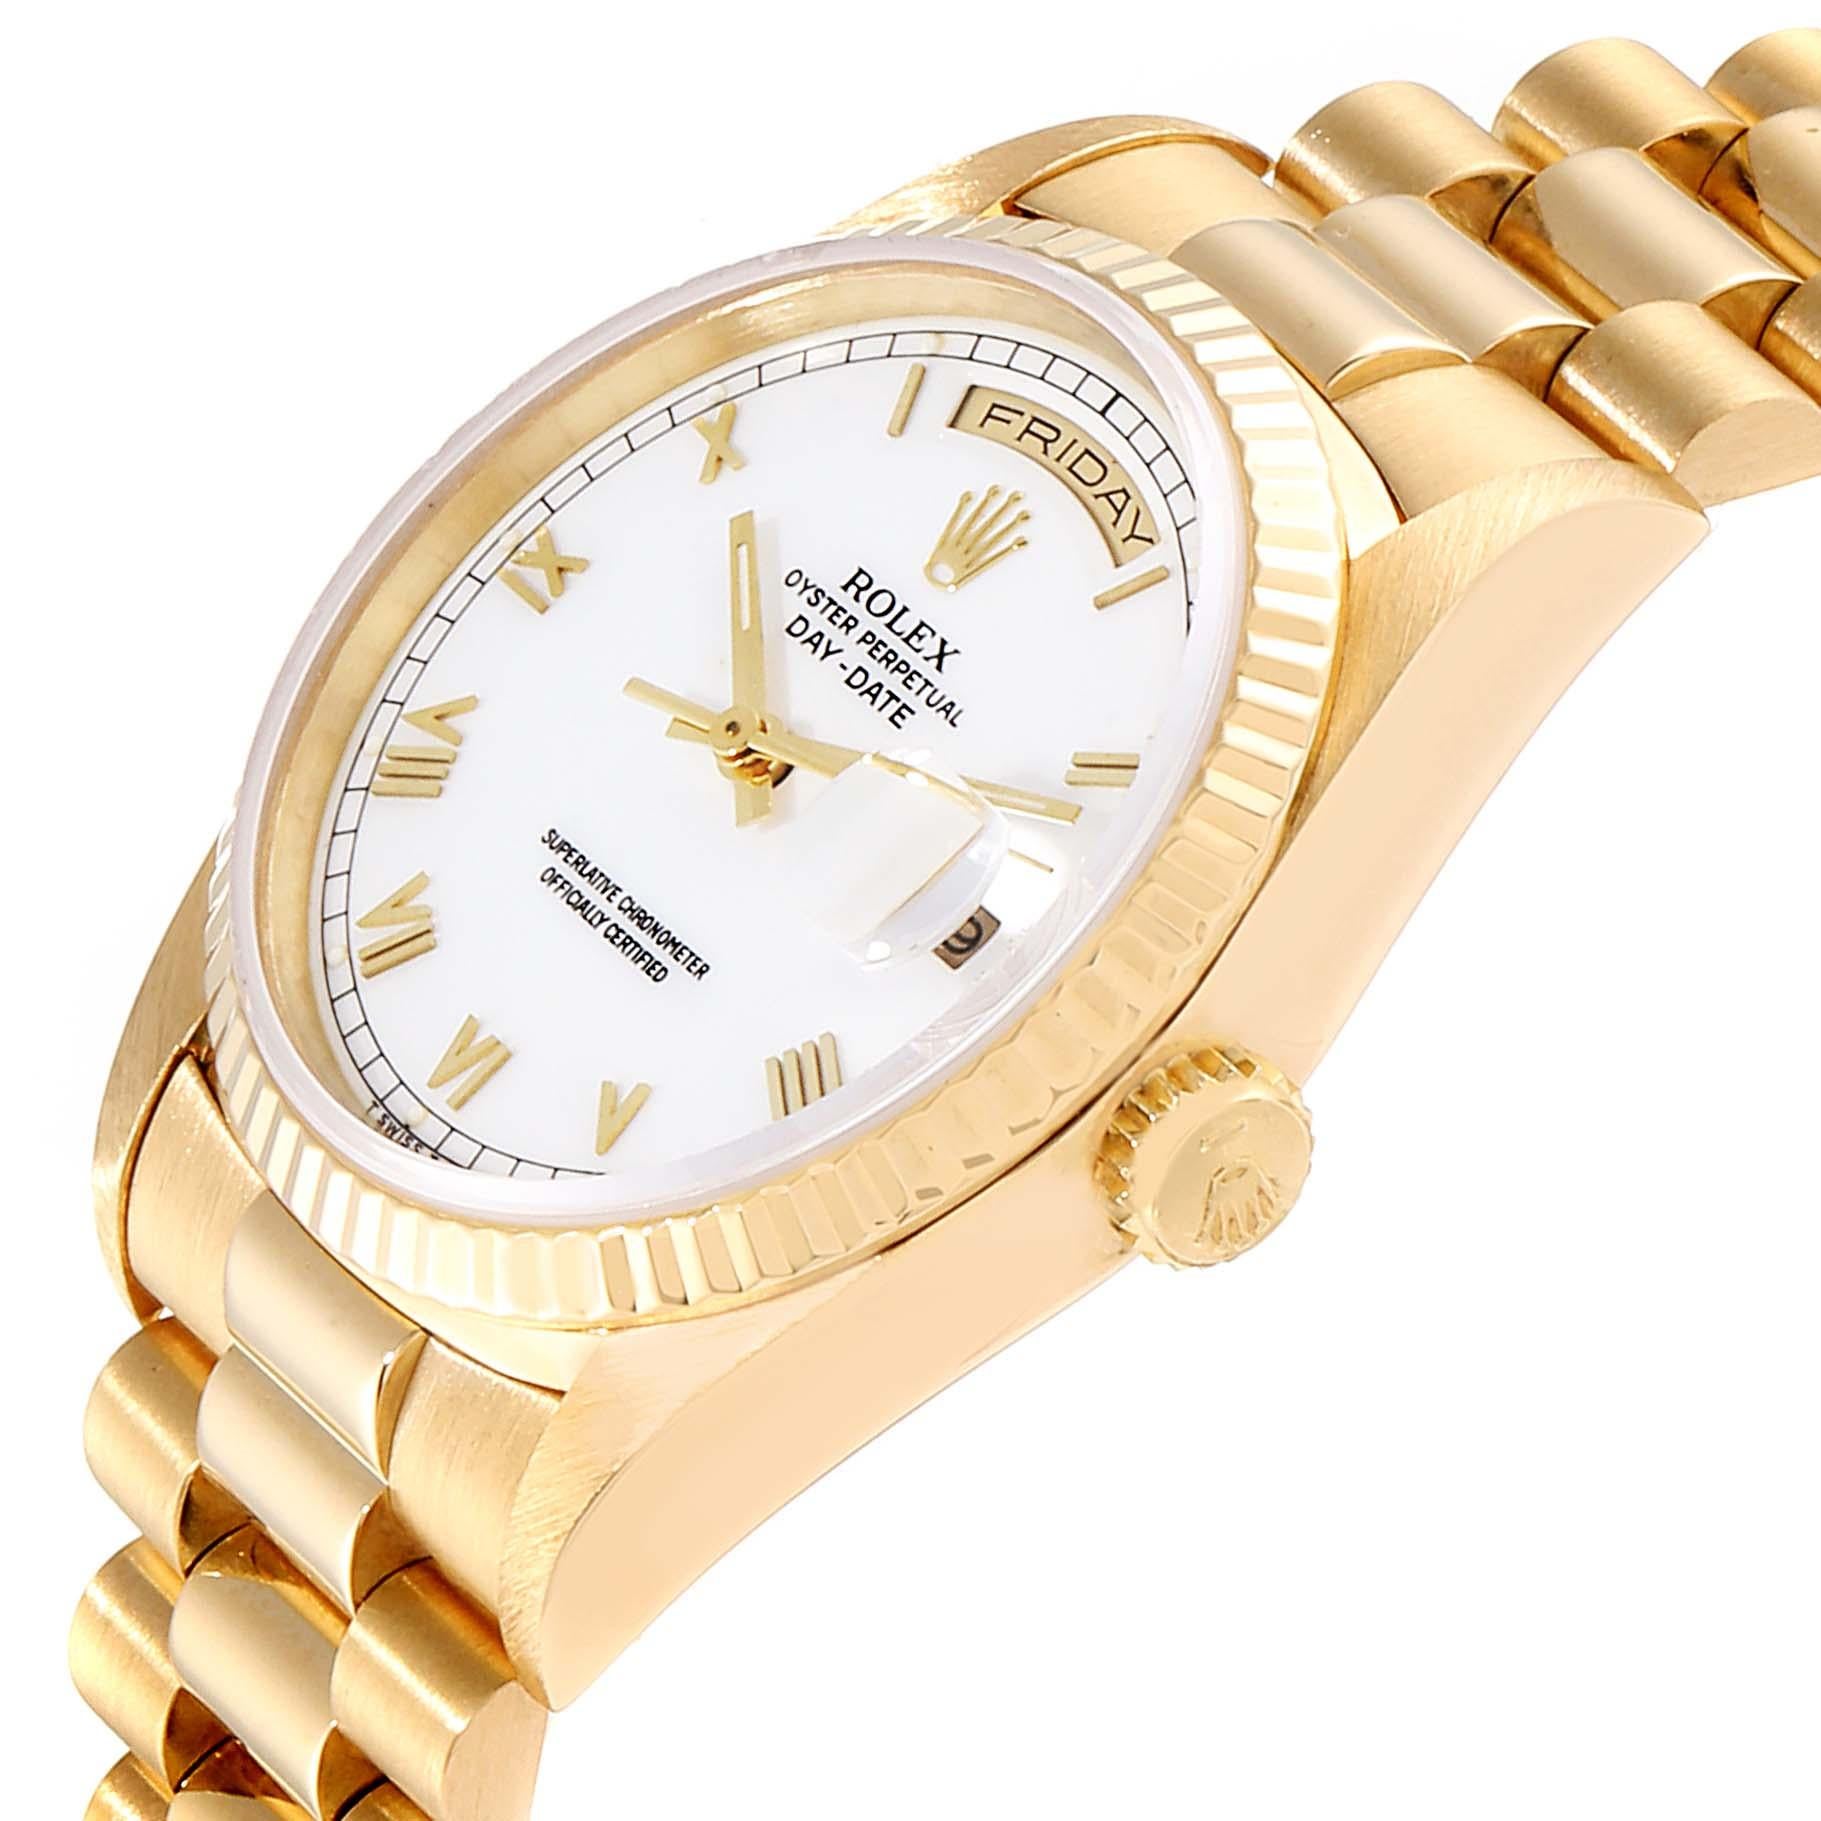 Rolex President Day-Date 18 Karat Yellow Gold White Dial Men's Watch 18238 For Sale 2